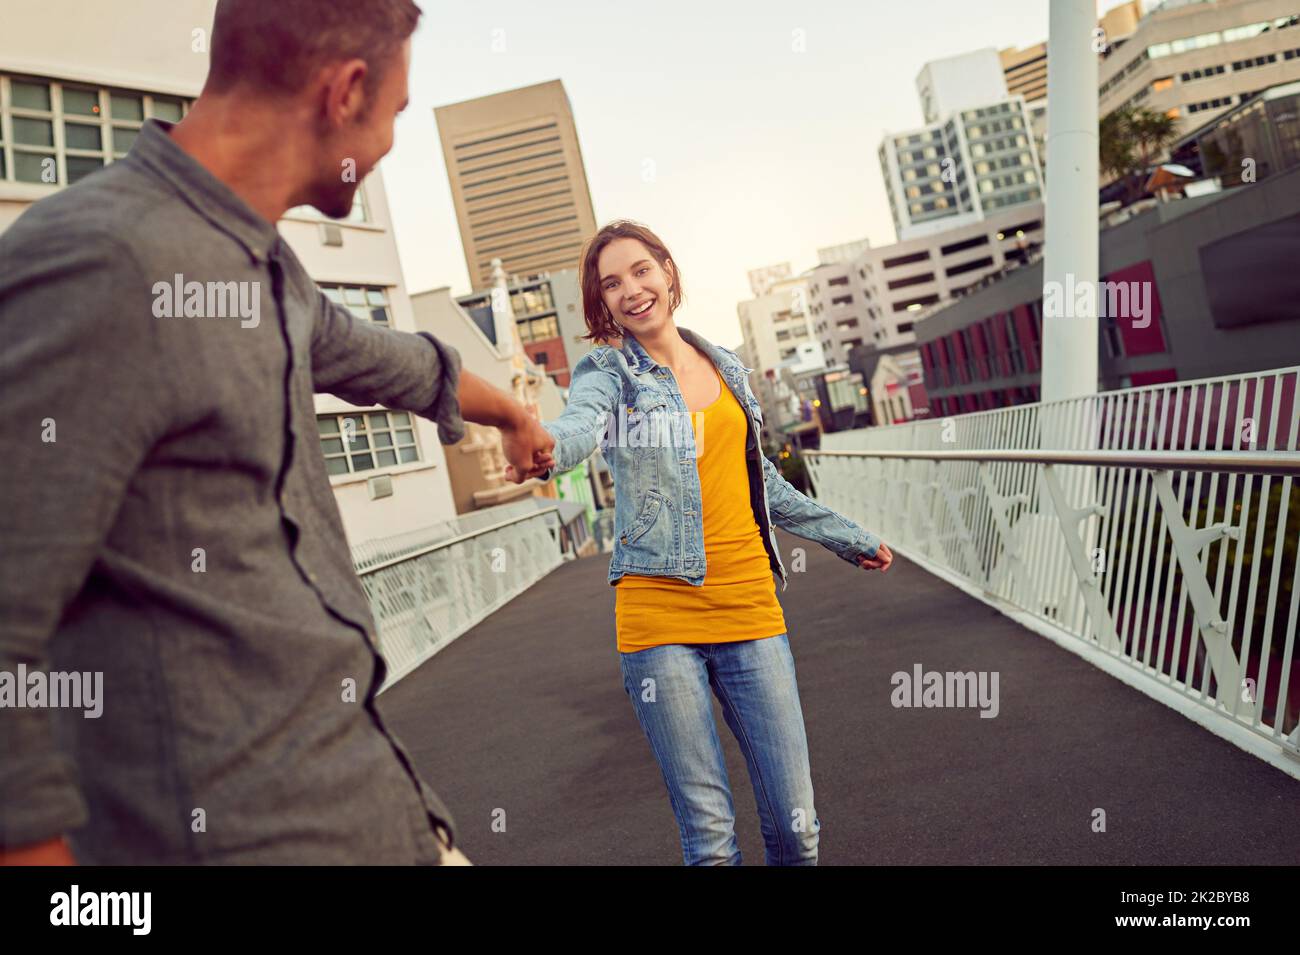 Romantic city strolls. Shot of a happy young couple enjoying a romantic walk together in the city. Stock Photo